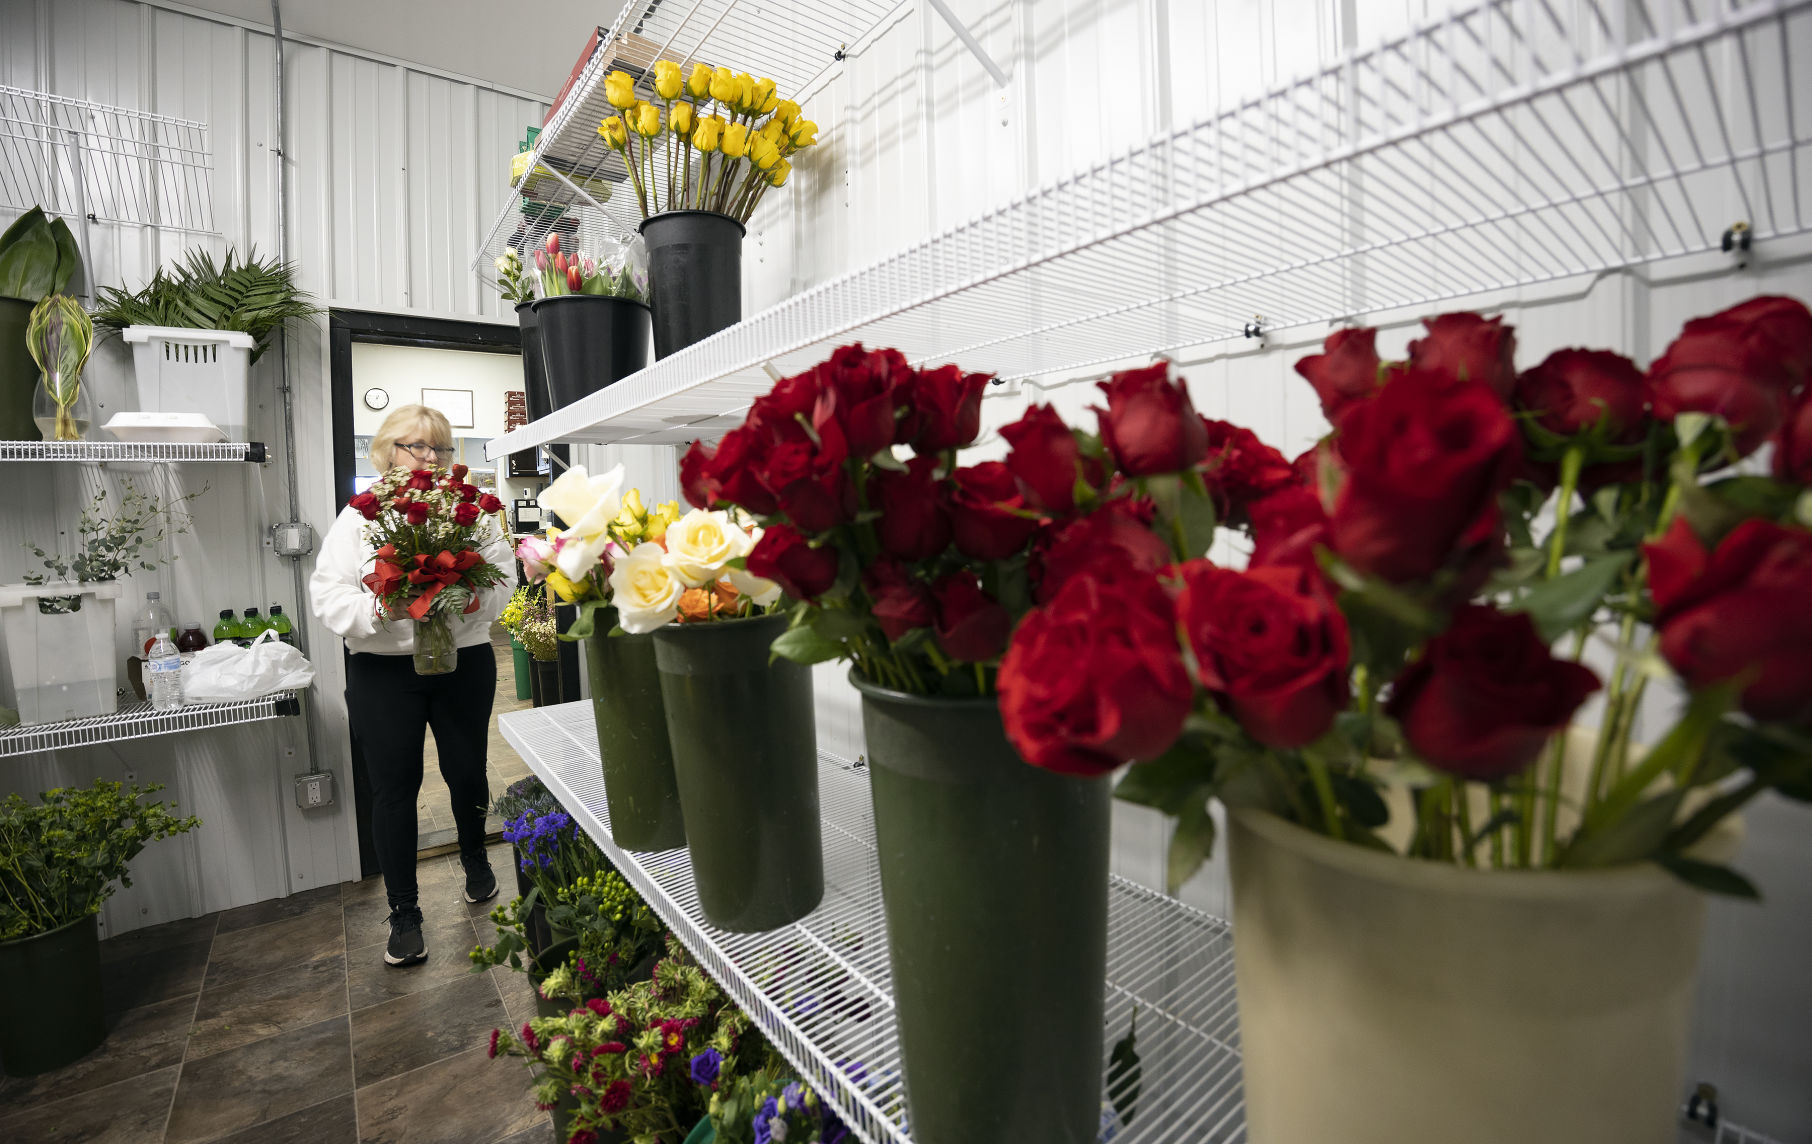 Store manager Julie Gross carries a bouquet of roses into the cooler at Butt’s Florist in Dubuque on Friday.    PHOTO CREDIT: Stephen Gassman